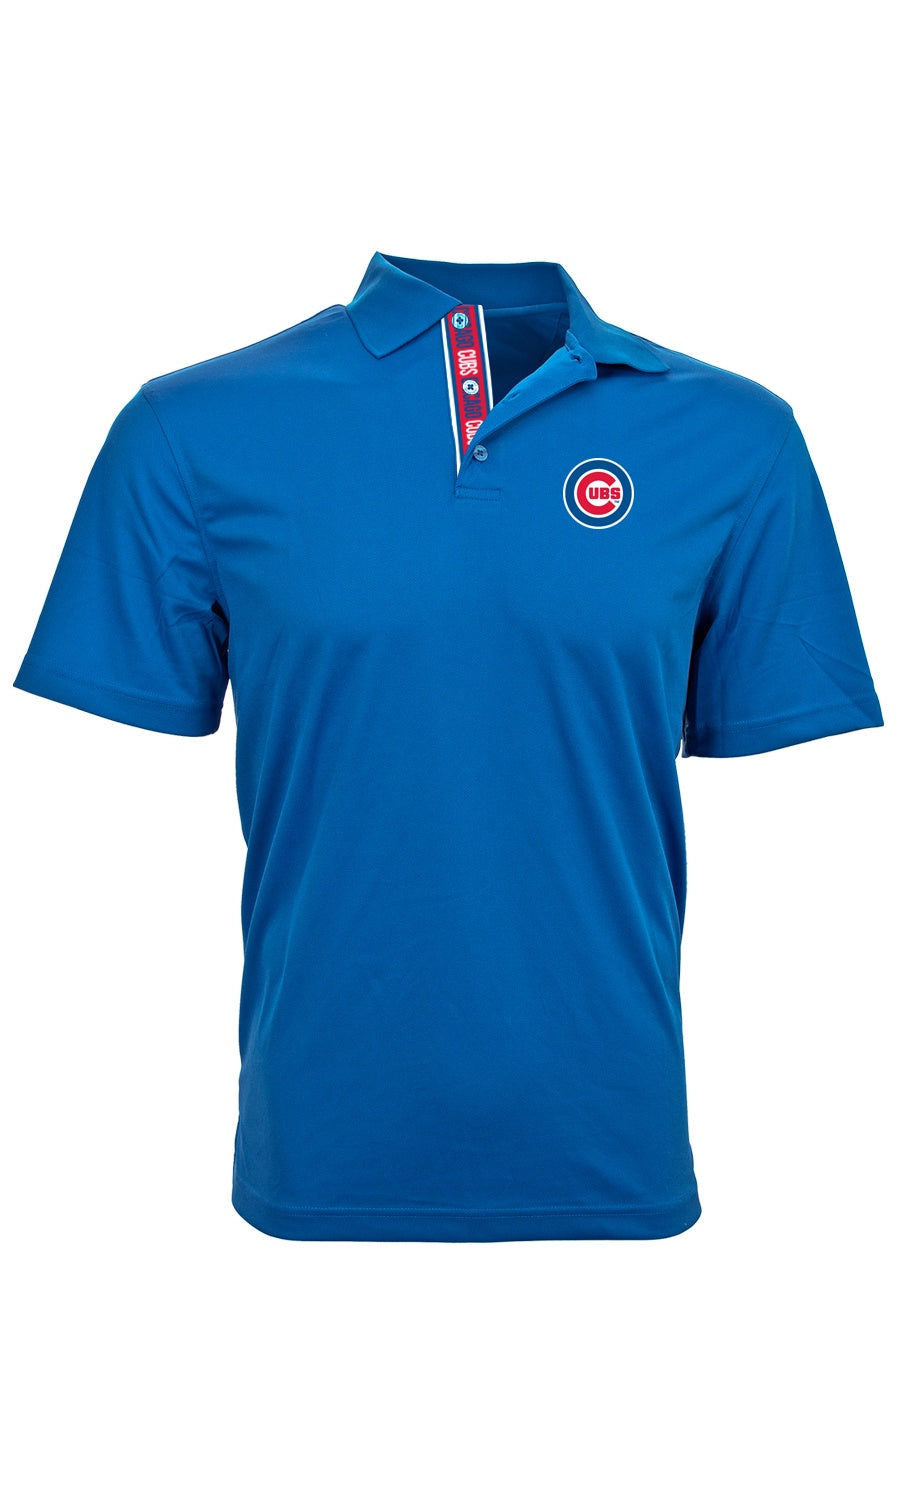 Men's Chicago Cubs Repeat Omaha Royal Blue Level Wear Polo